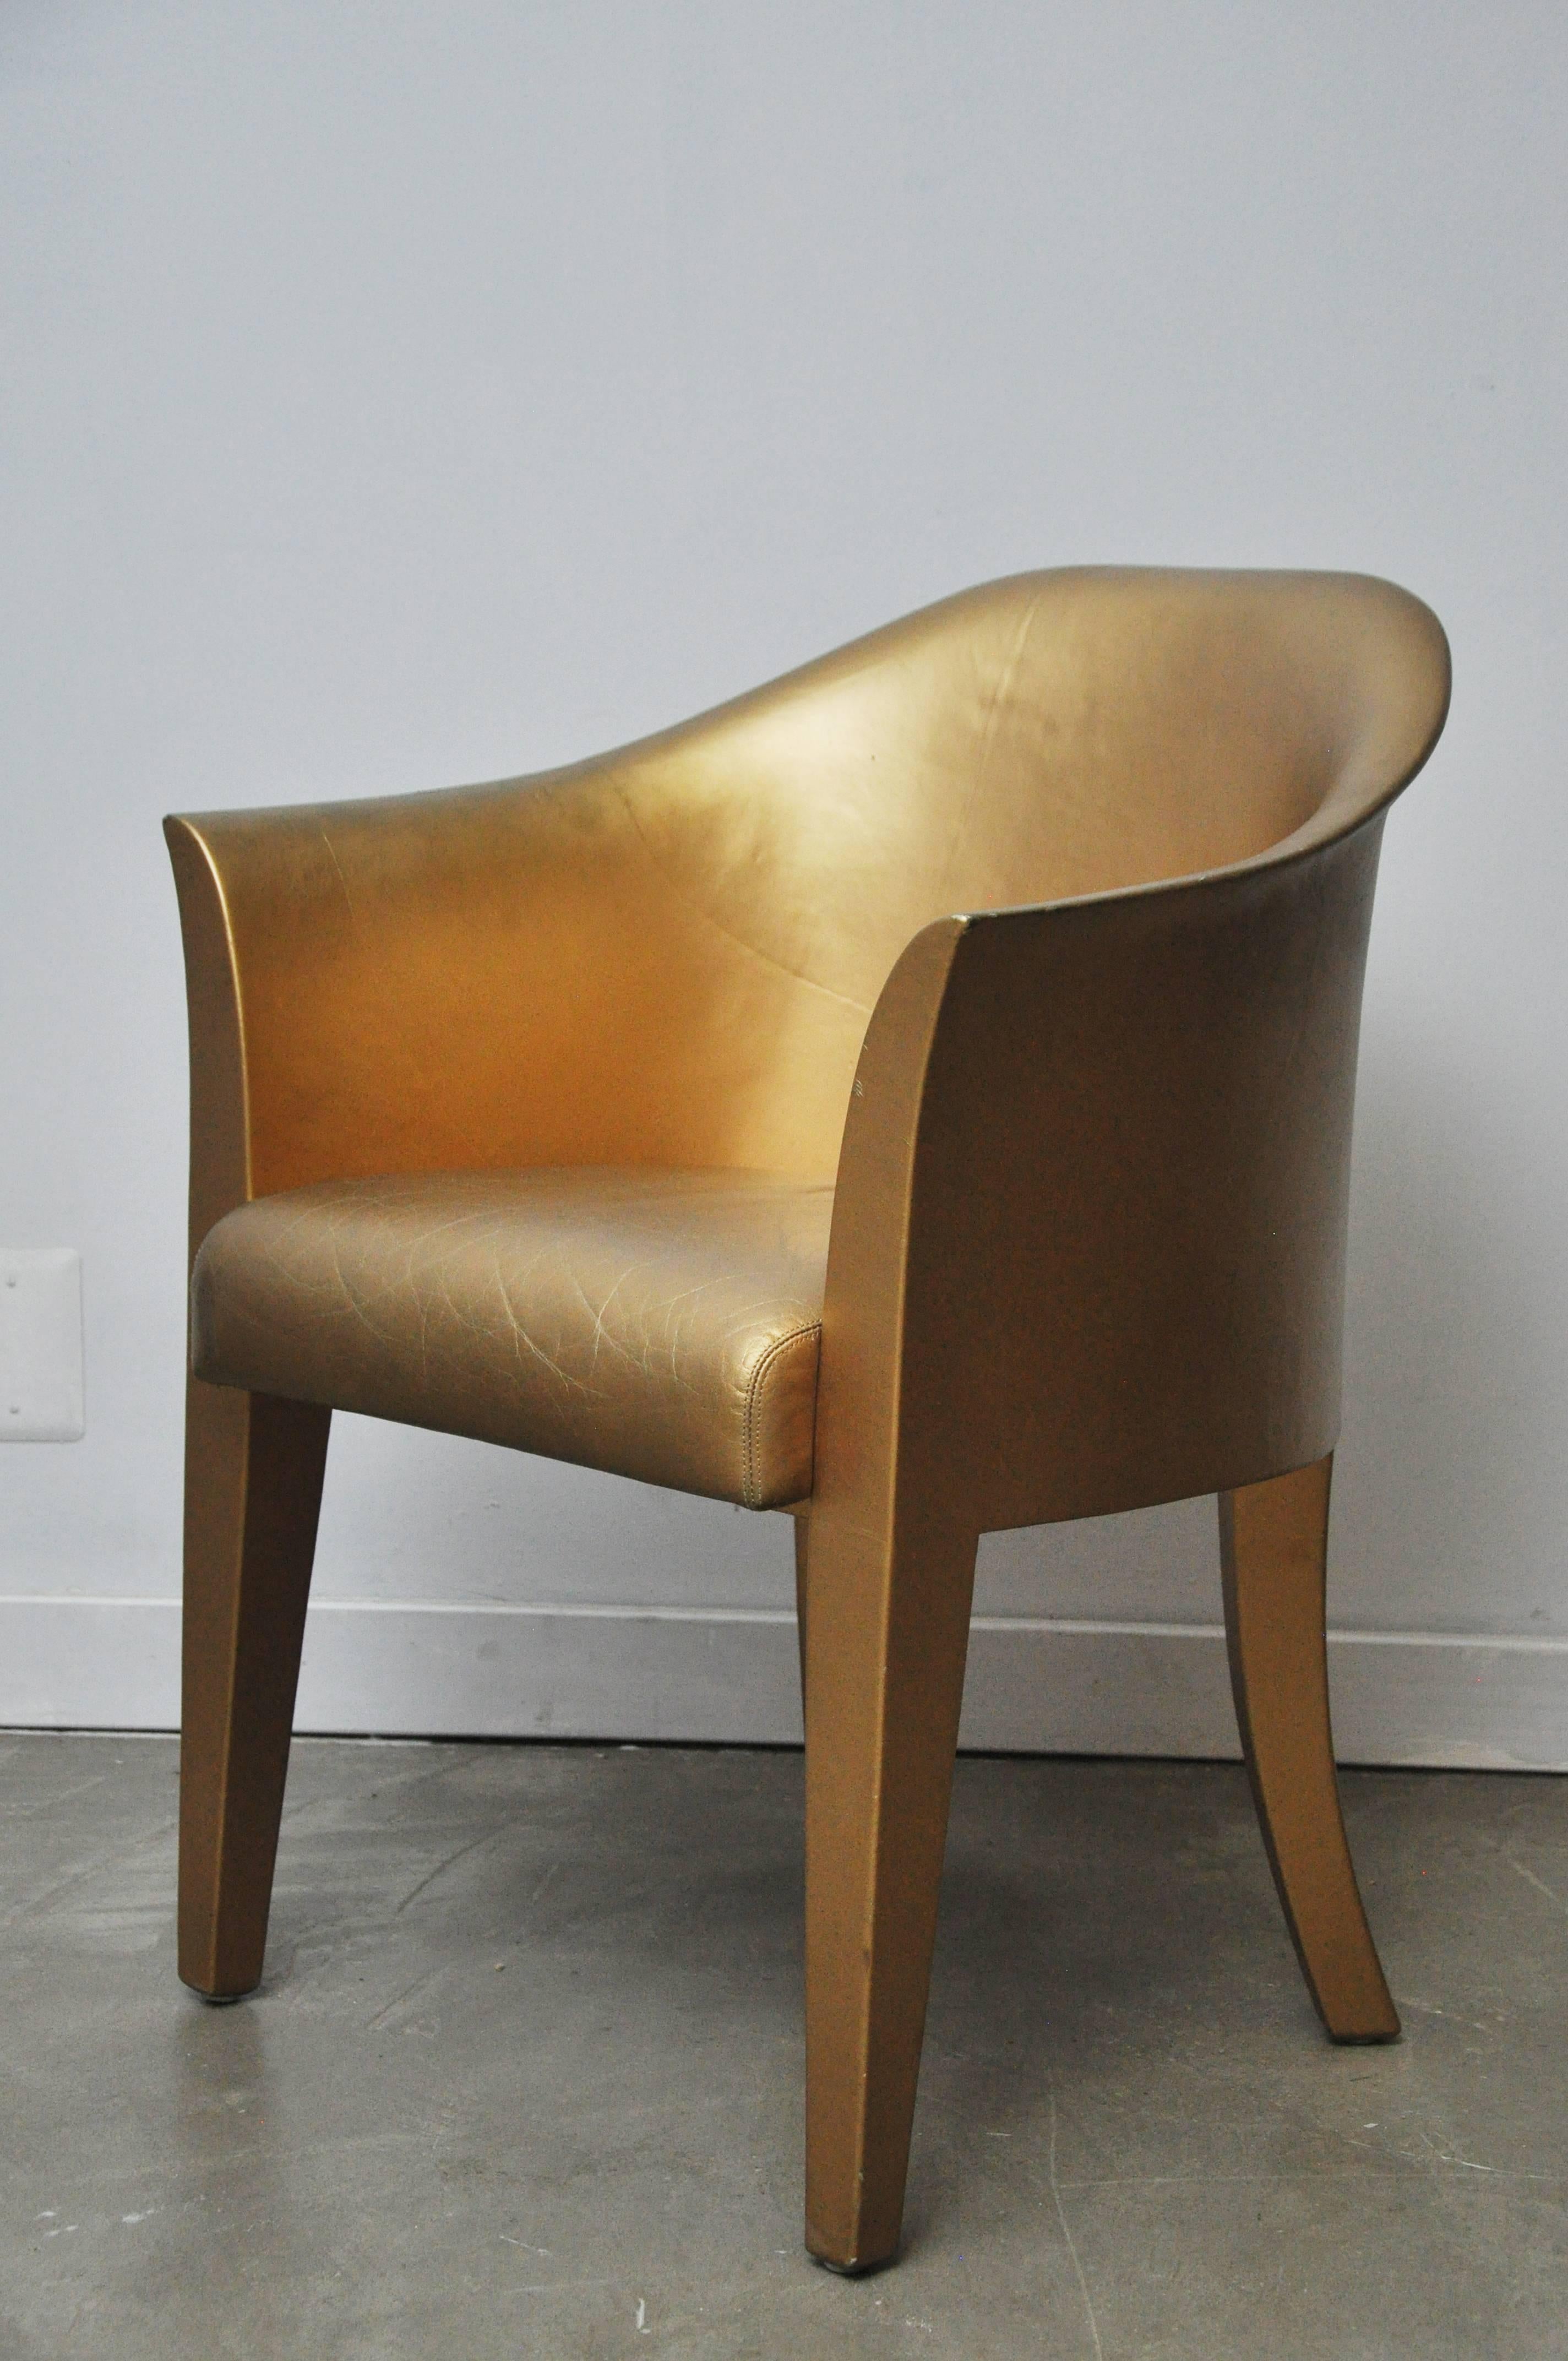 Armchair covered in gold leather. Karl Springer, 1994.